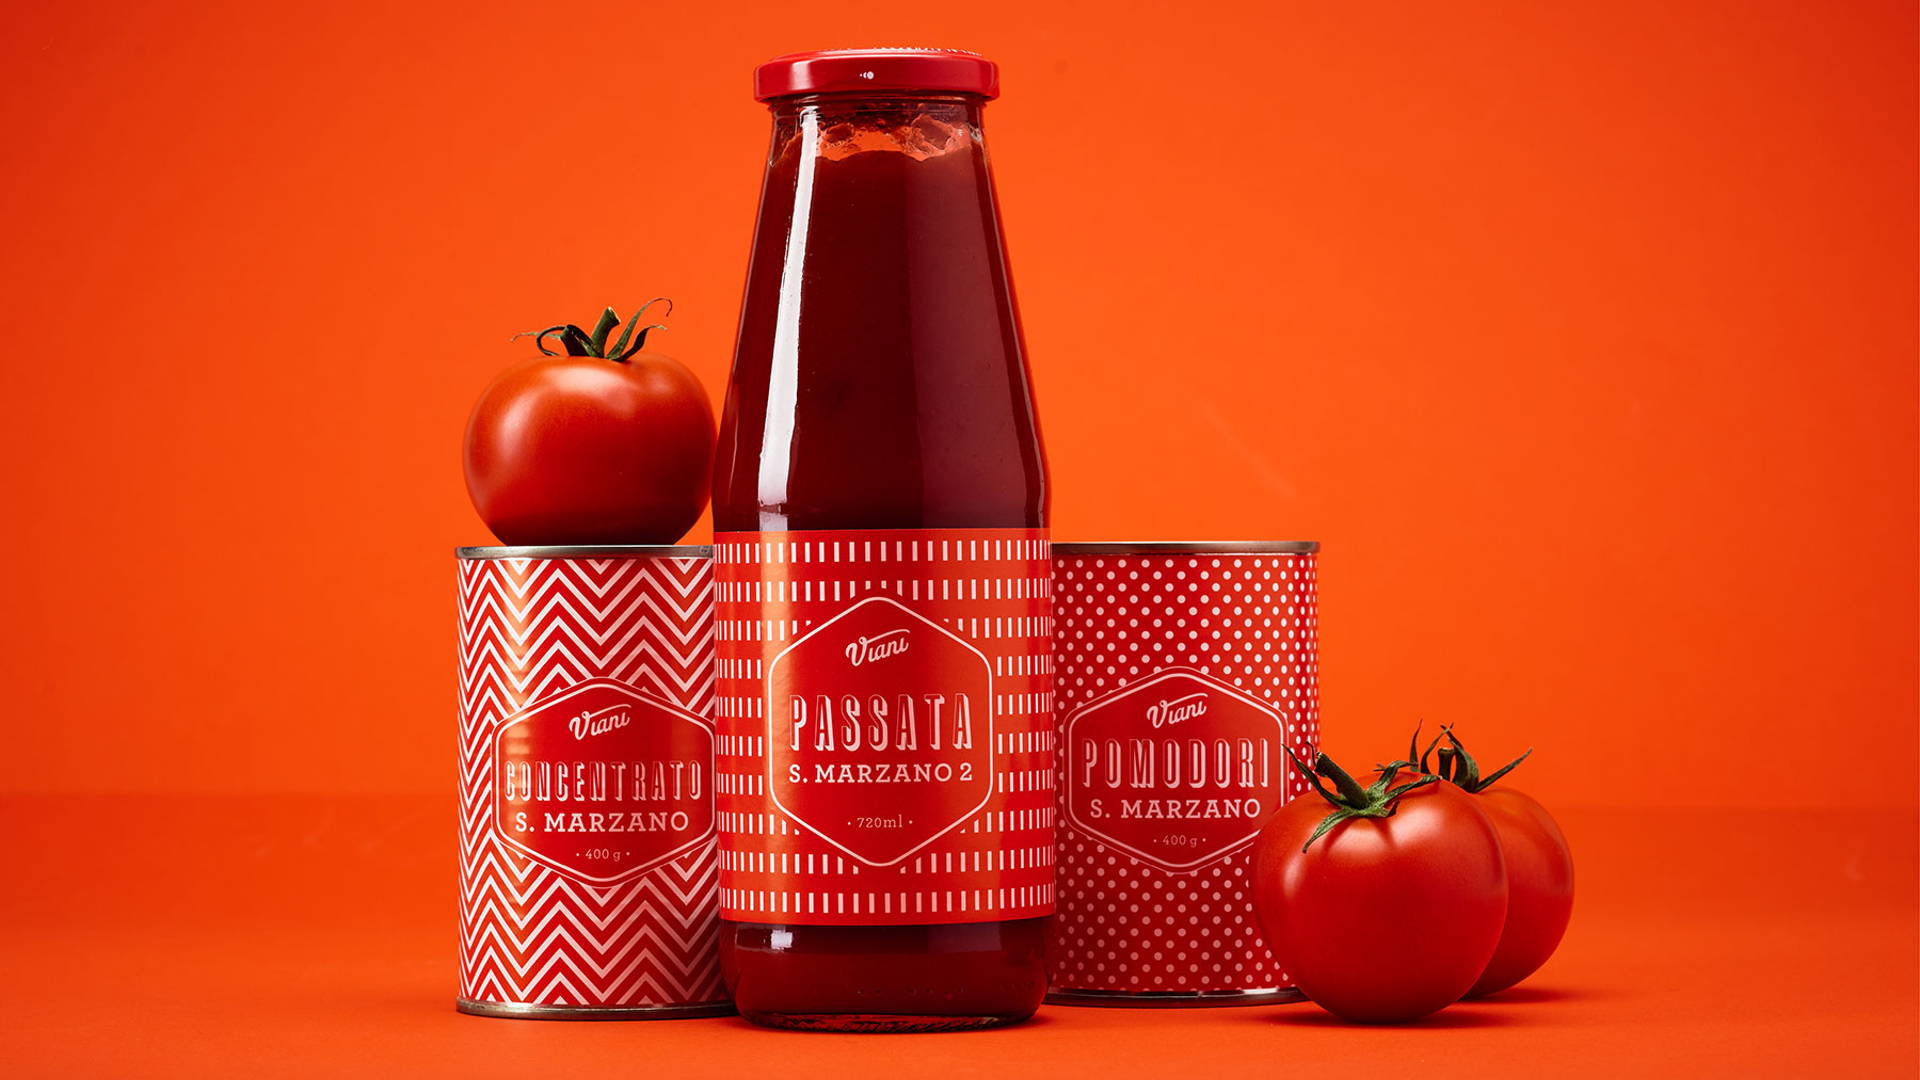 Featured image for This Packaging Aims To Capture The Romantic Spirit of Italy